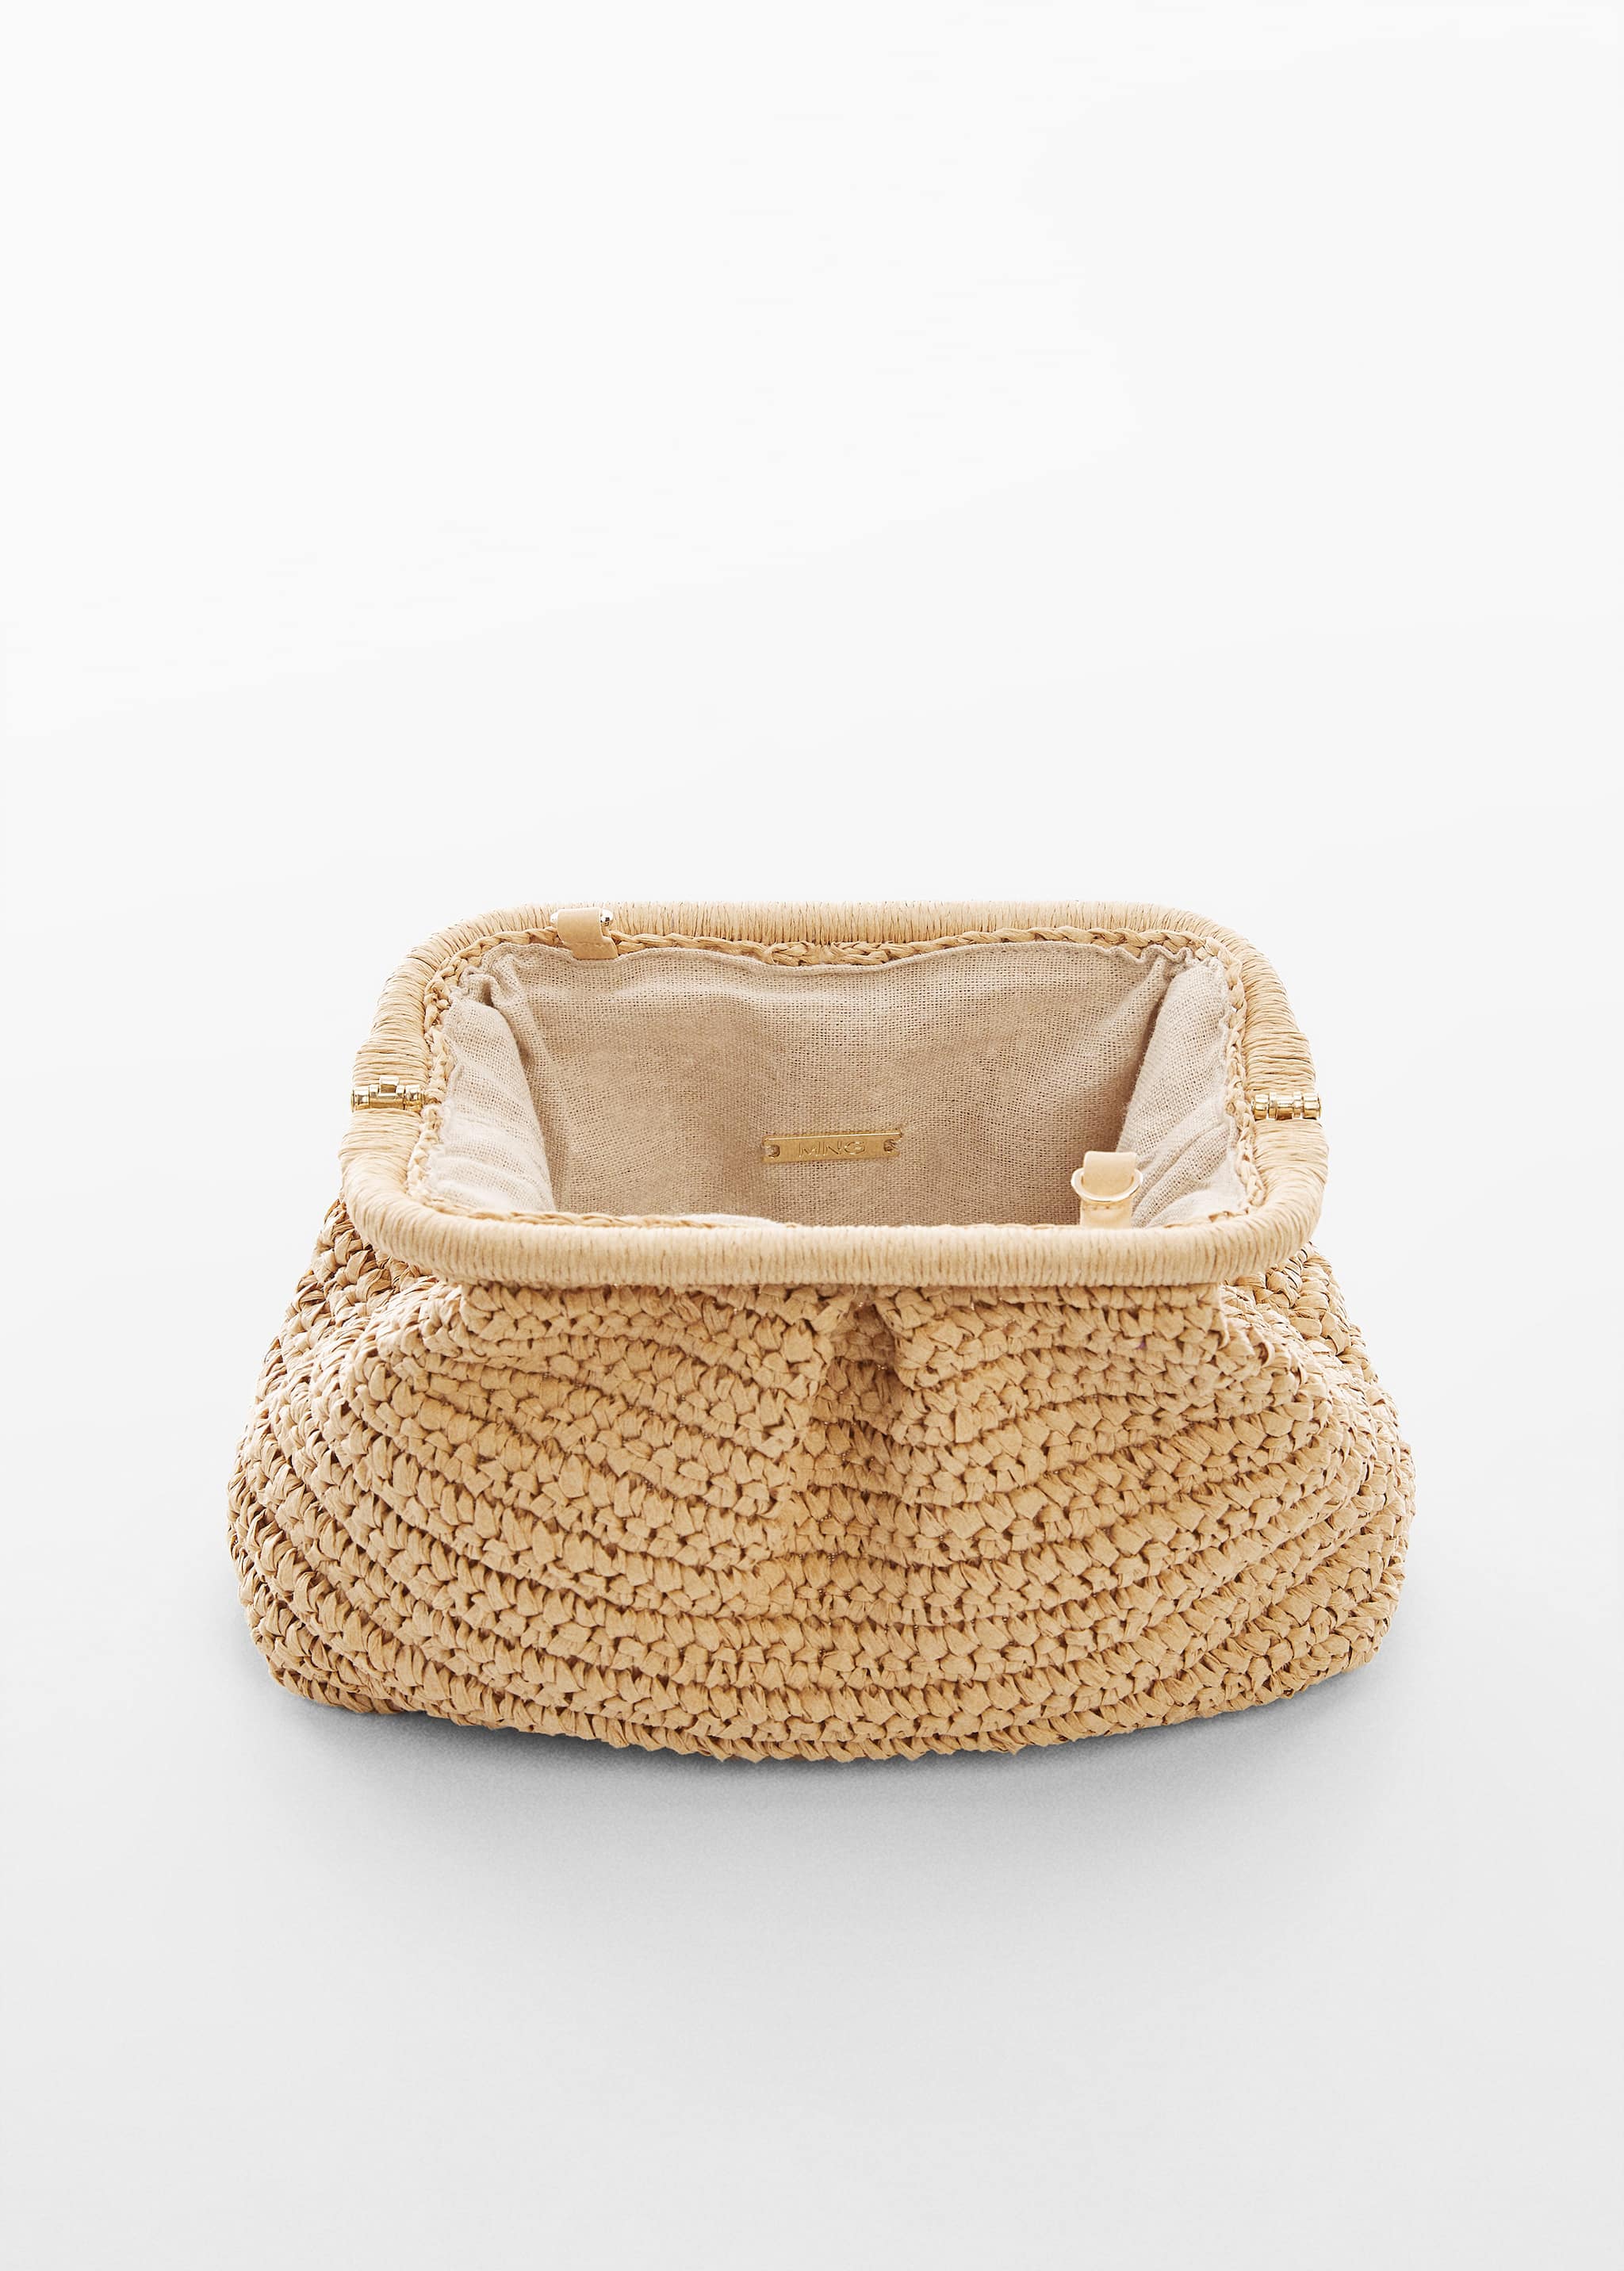 Rattan clutch bag - Details of the article 2